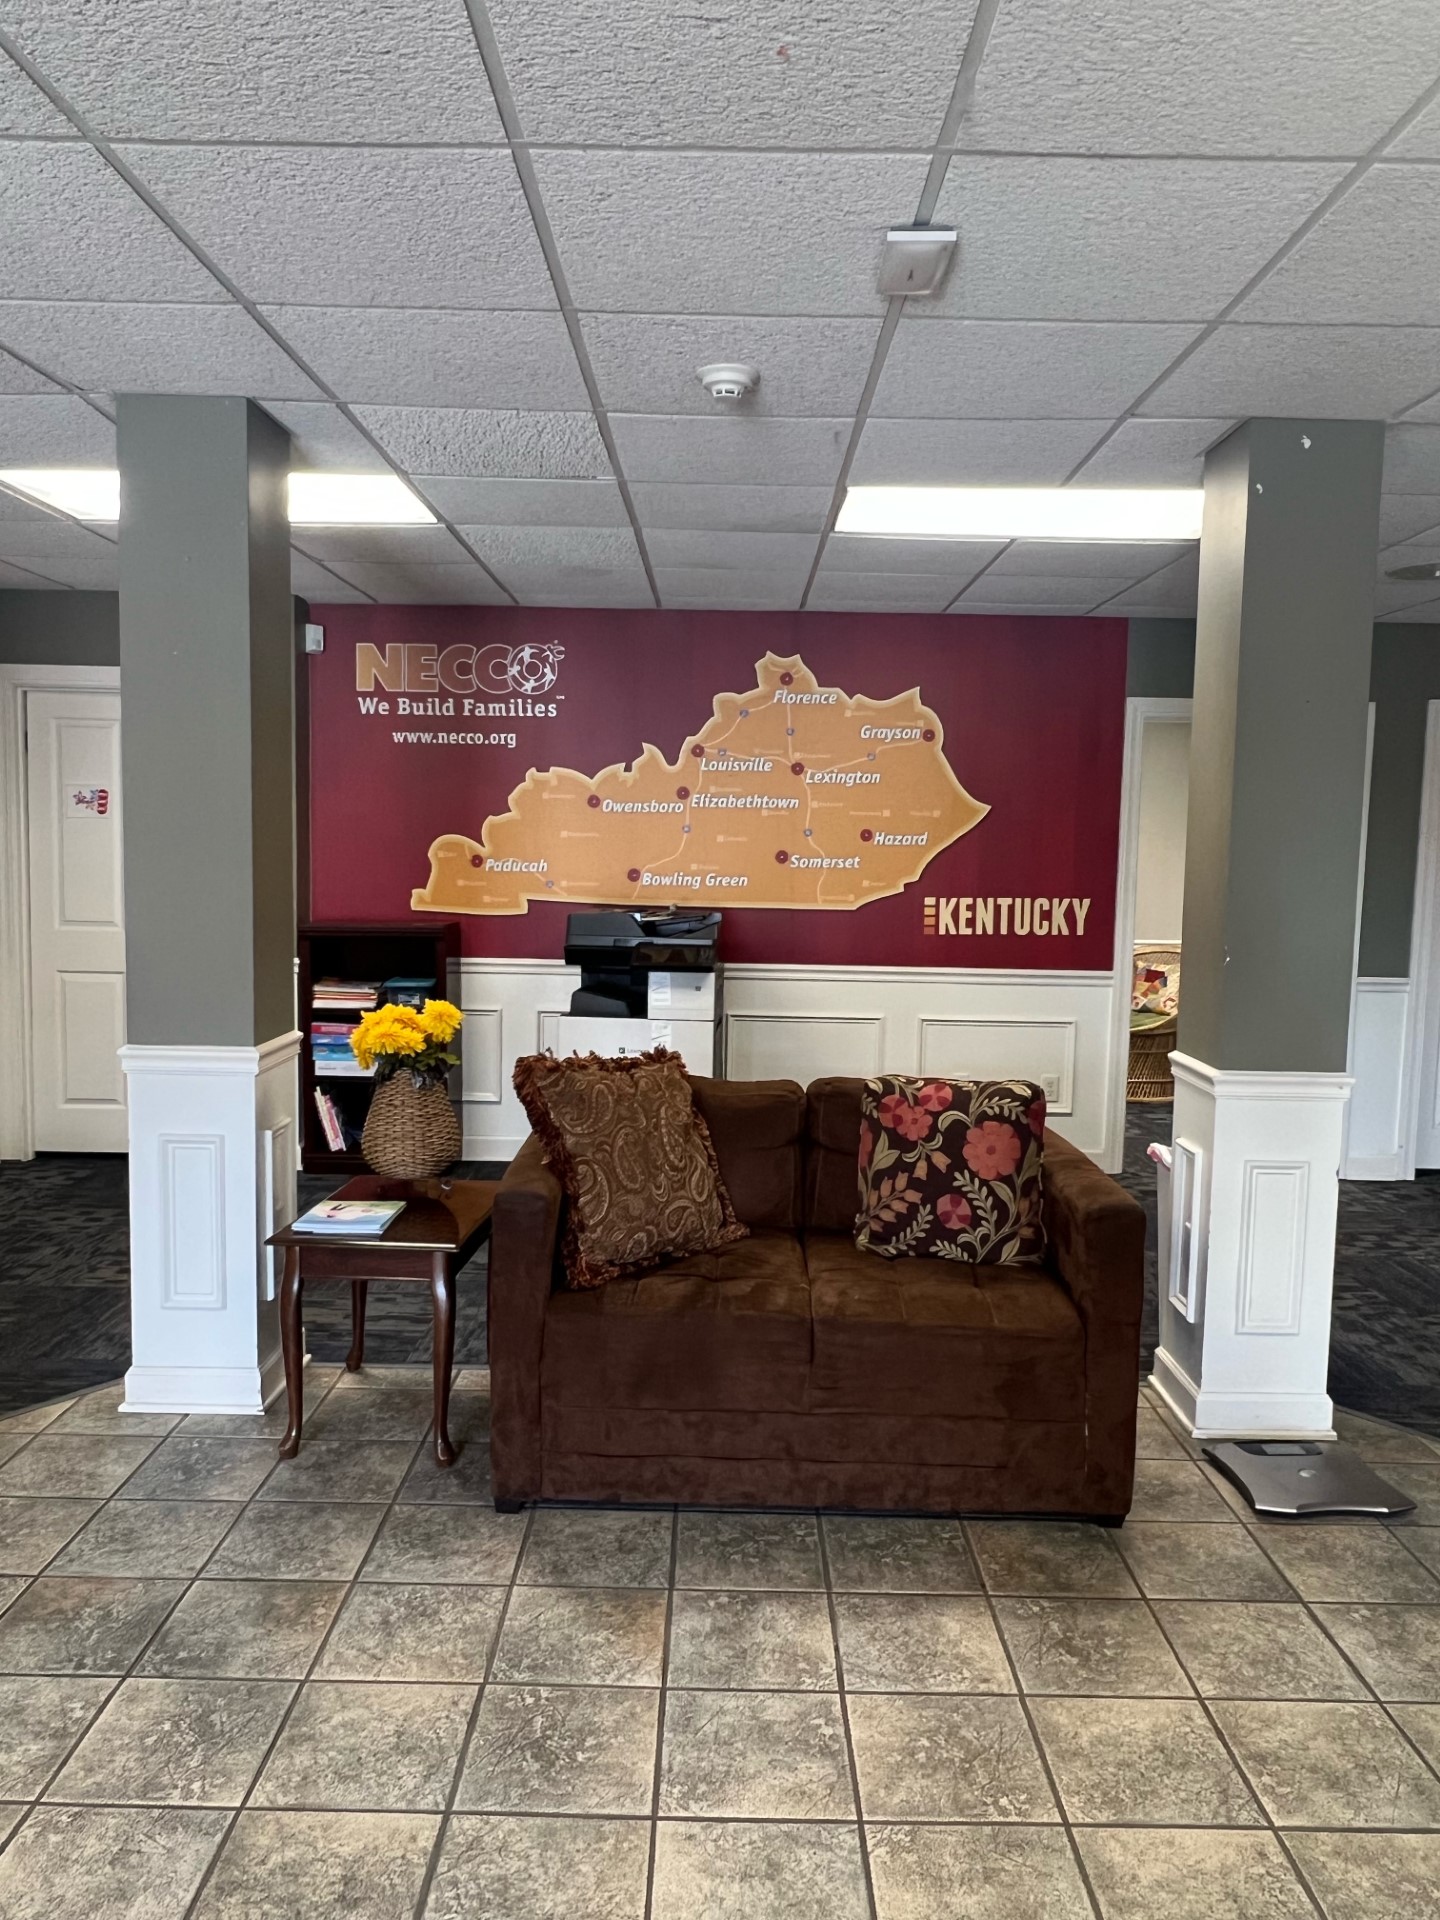 Front lobby at the Necco Bowling Green office.